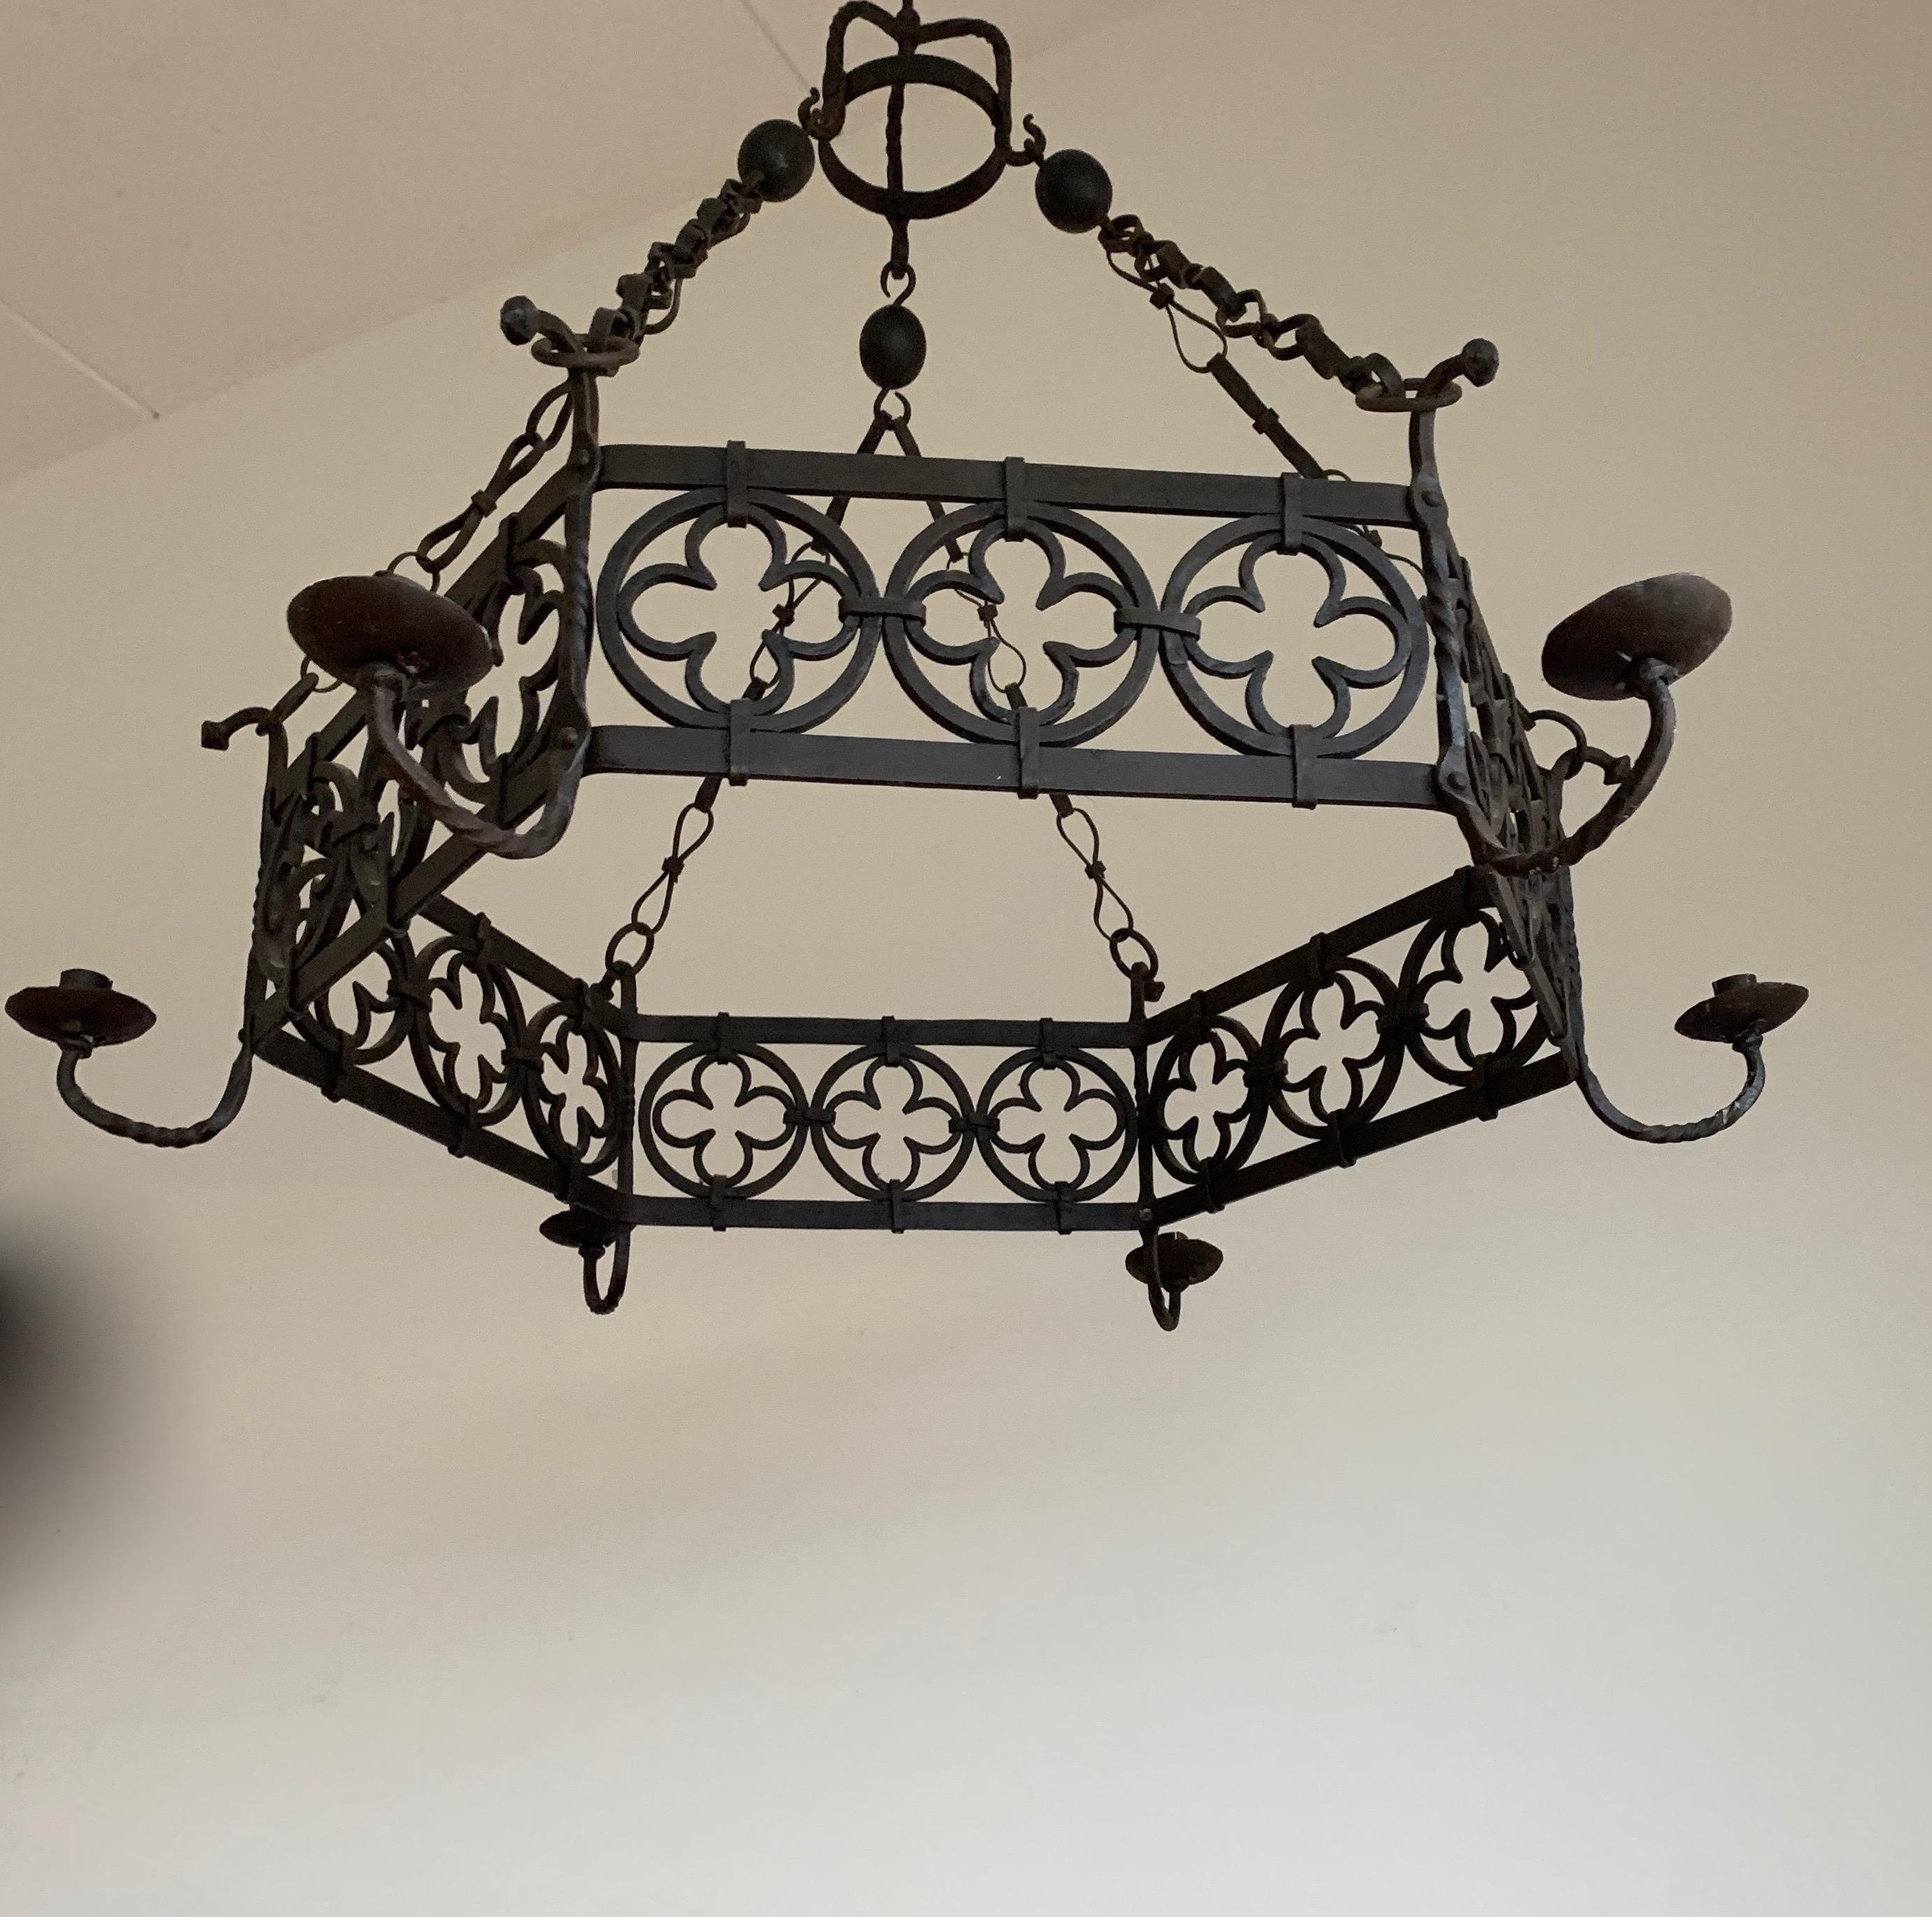 Great quality workmanship, forged in fire Gothic Art candle chandelier or pendant light.

This beautiful quality and all hand forged chandelier comes with clearly visible, Gothic quatrefoil elements which certainly lifts it above the average. In the